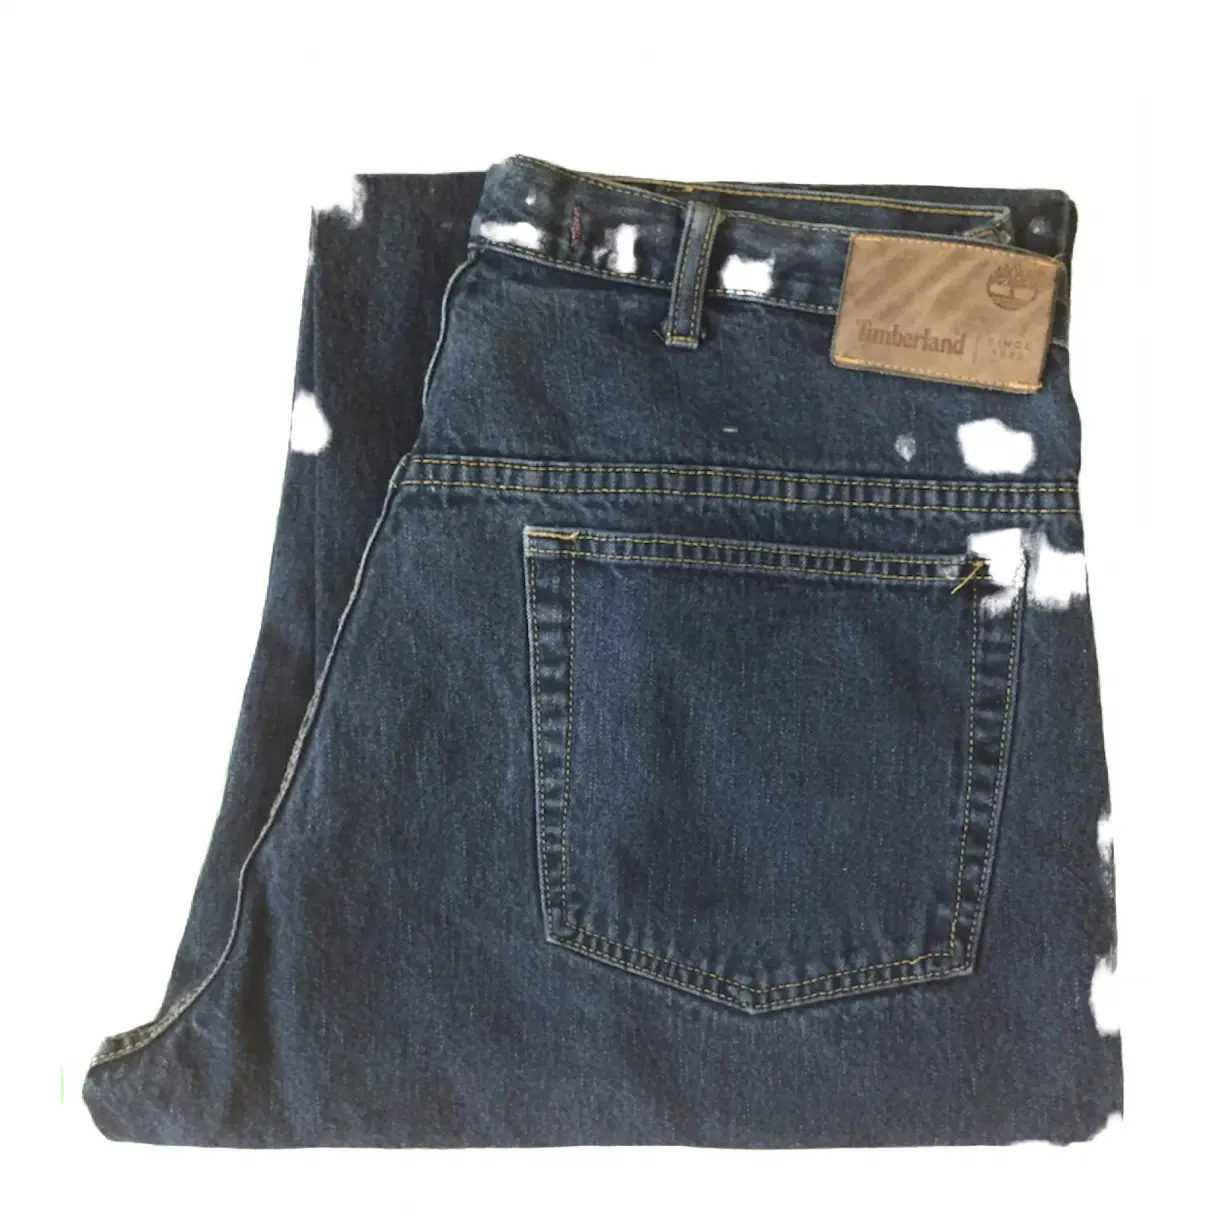 Buy Timberland Jeans online